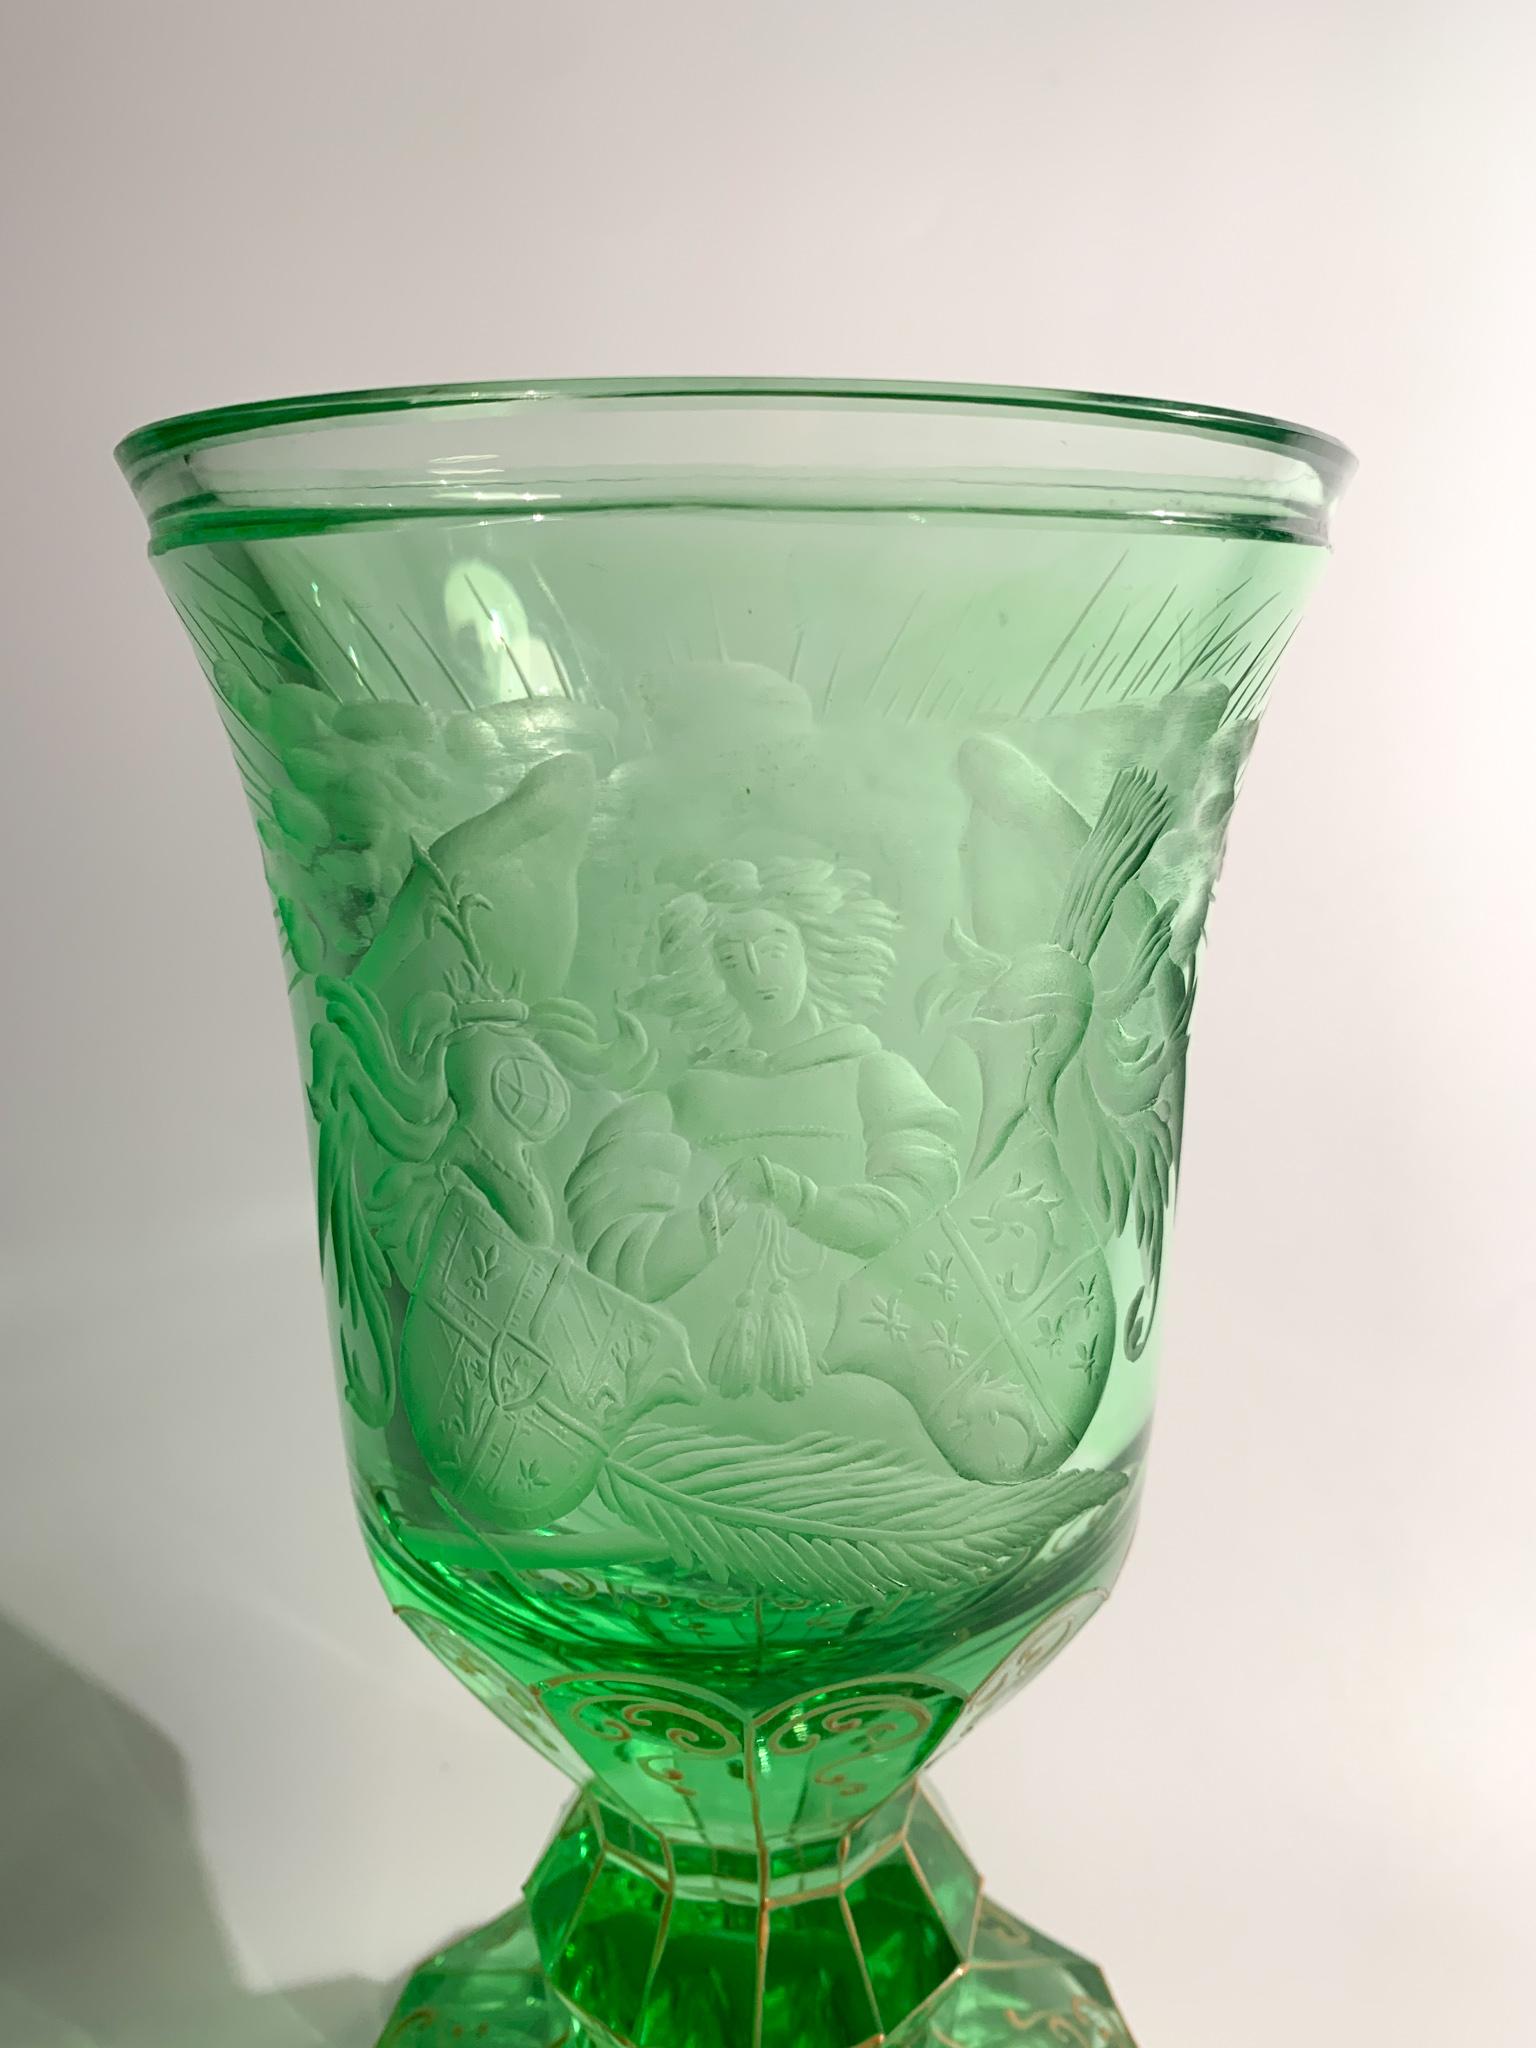 German Vase in Green Biedermeier Crystal Decorated with Acid from the 1800s